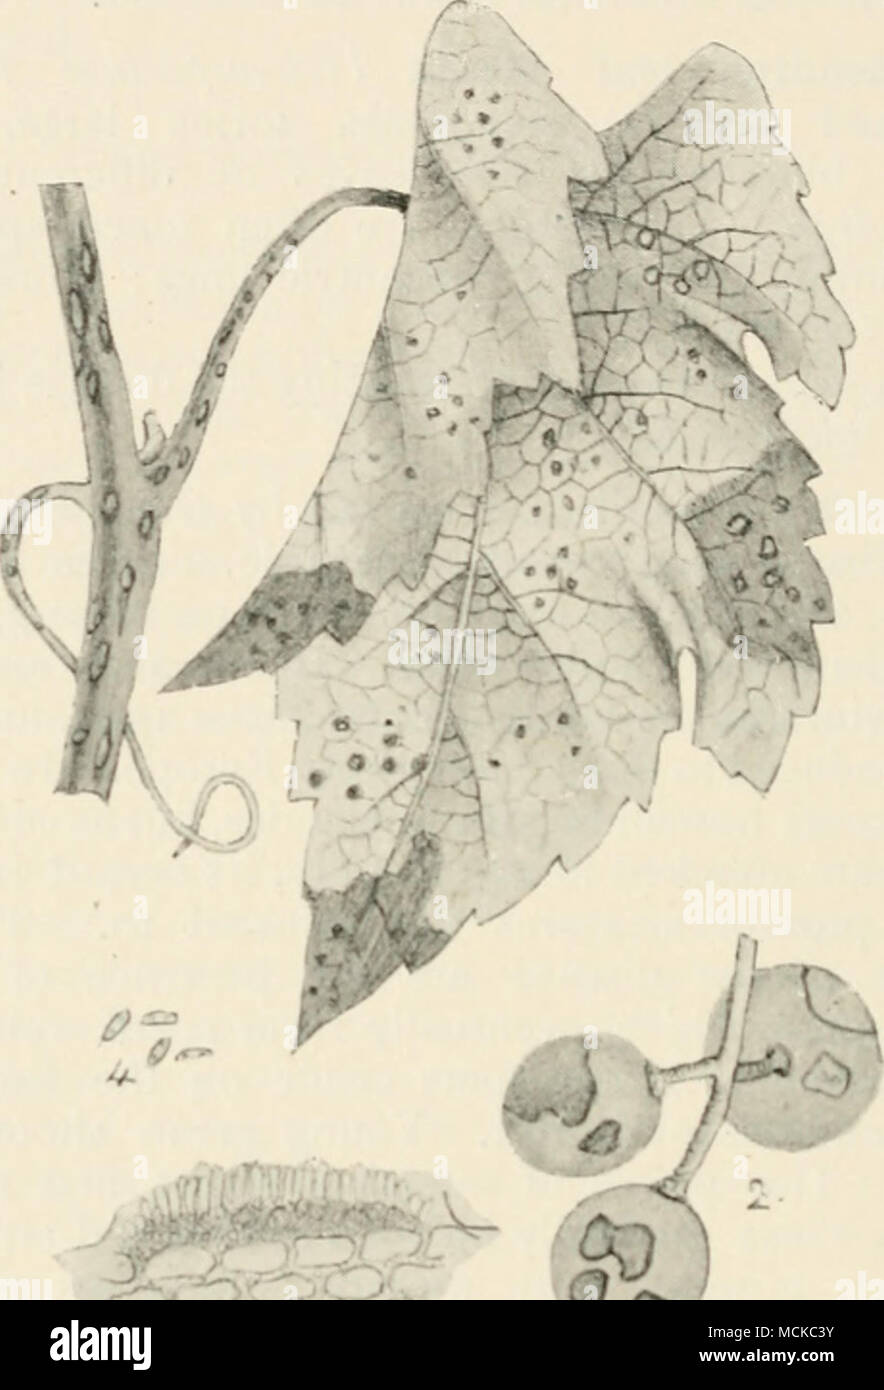 . 5L&gt; KiG. 135. —r;A'(('j/();7//w ampi-h&gt;plui i^iii)i. i, appearance of disease on stem, leaves, and tendrils of vine ; 2, diseased grapes ; 3, section of jjustule of fungus on young grape; 4, conidia. Kigs. I and 2 natural size ; remainder mag. spots scattered over the fruit. When one grape in a bunch is infected, the disease spreads rapidly until every grape is attacked, the spores being washed by rain from one fruit to another. Diseased fruit often becomes contorted and much cracked, exposing the pips, and finally shrinks and becomes mummified, sliil remaining hanging on the vine. Stock Photo